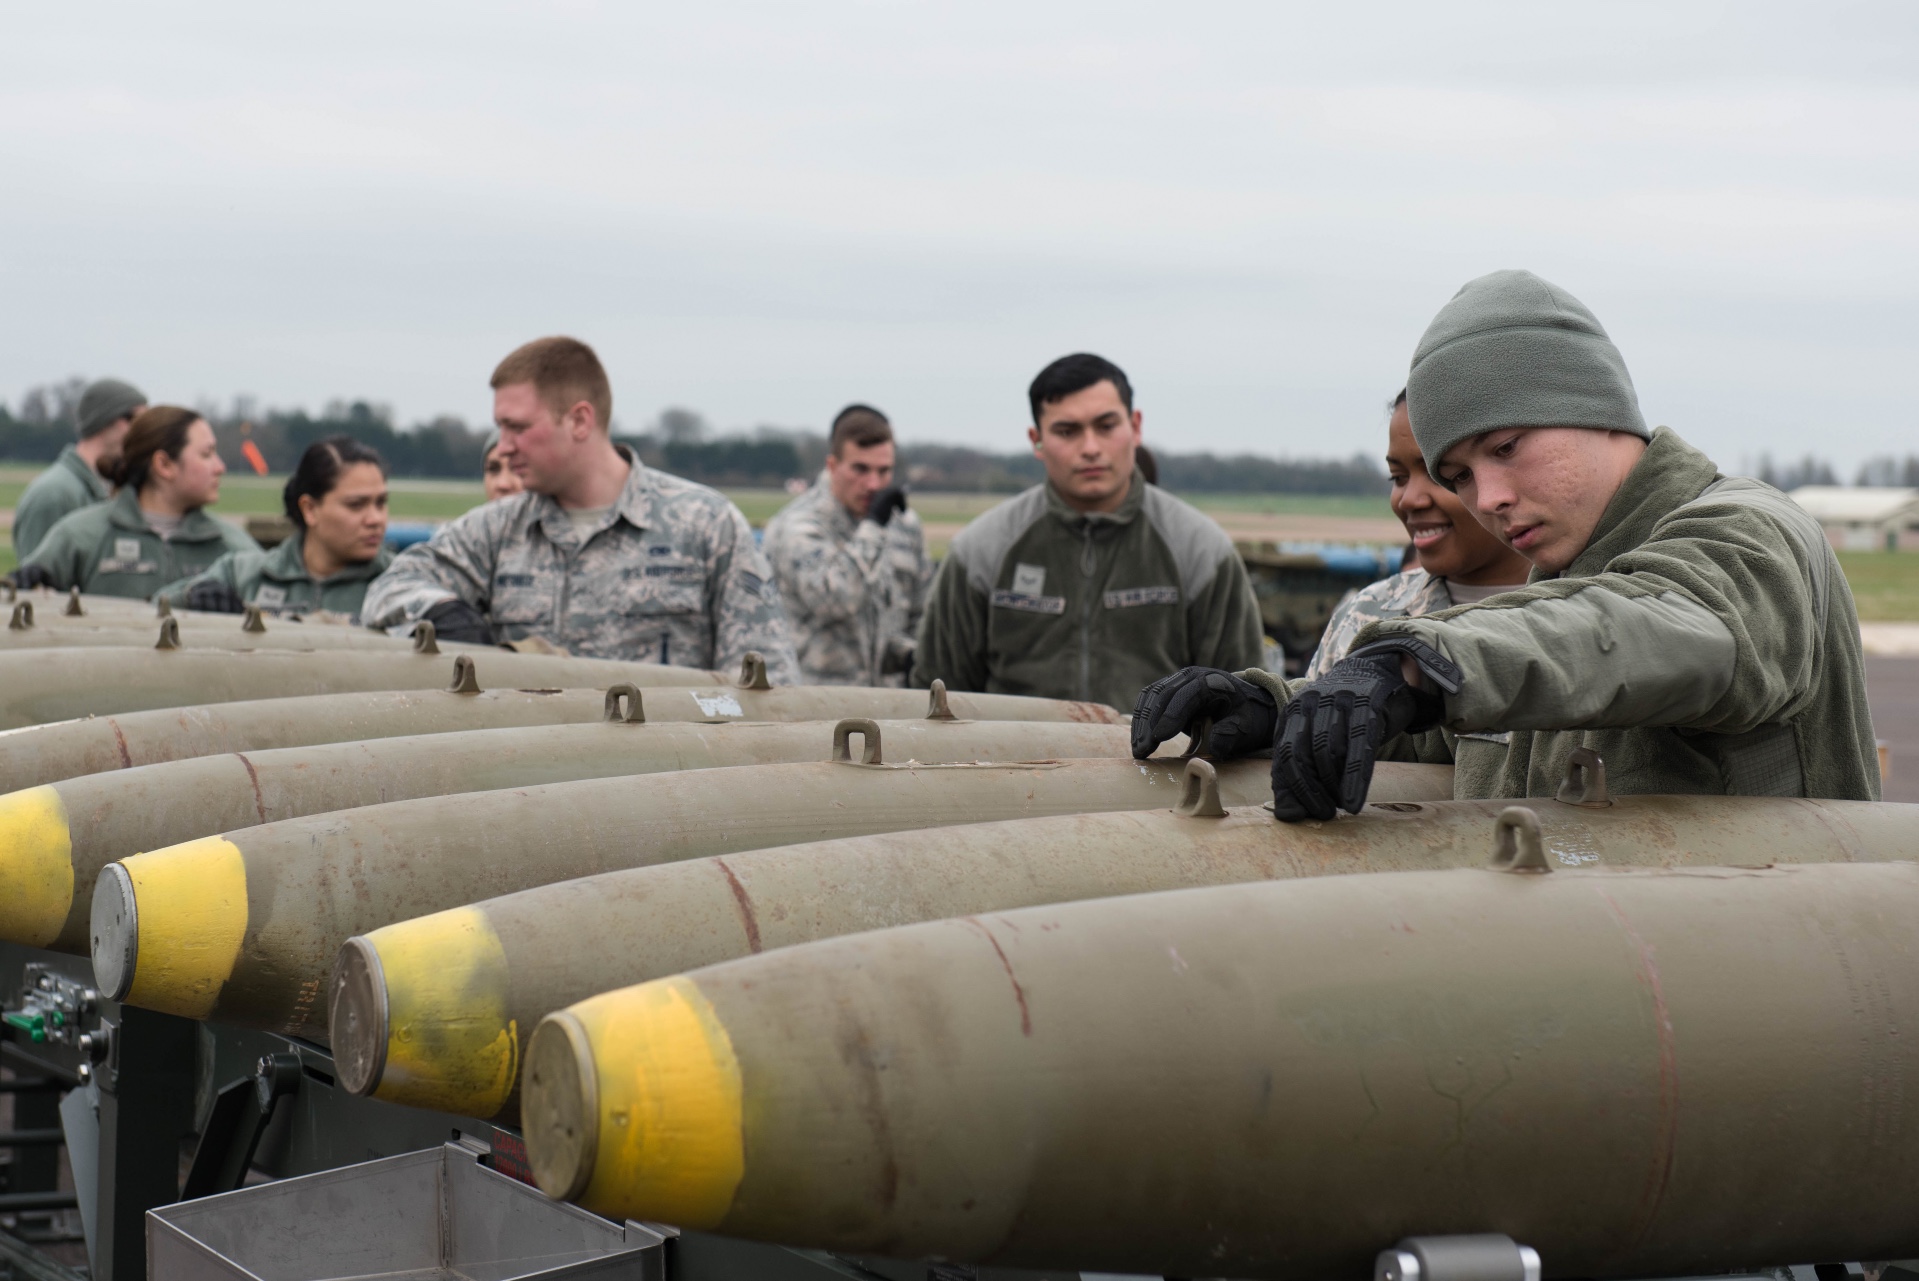 Airmen assigned to the 2nd Munitions Squadron assembly munitions, deployed from Barksdale Air Force Base, La., work on a Guided Bomb Unit - 38 at RAF Fairford, England